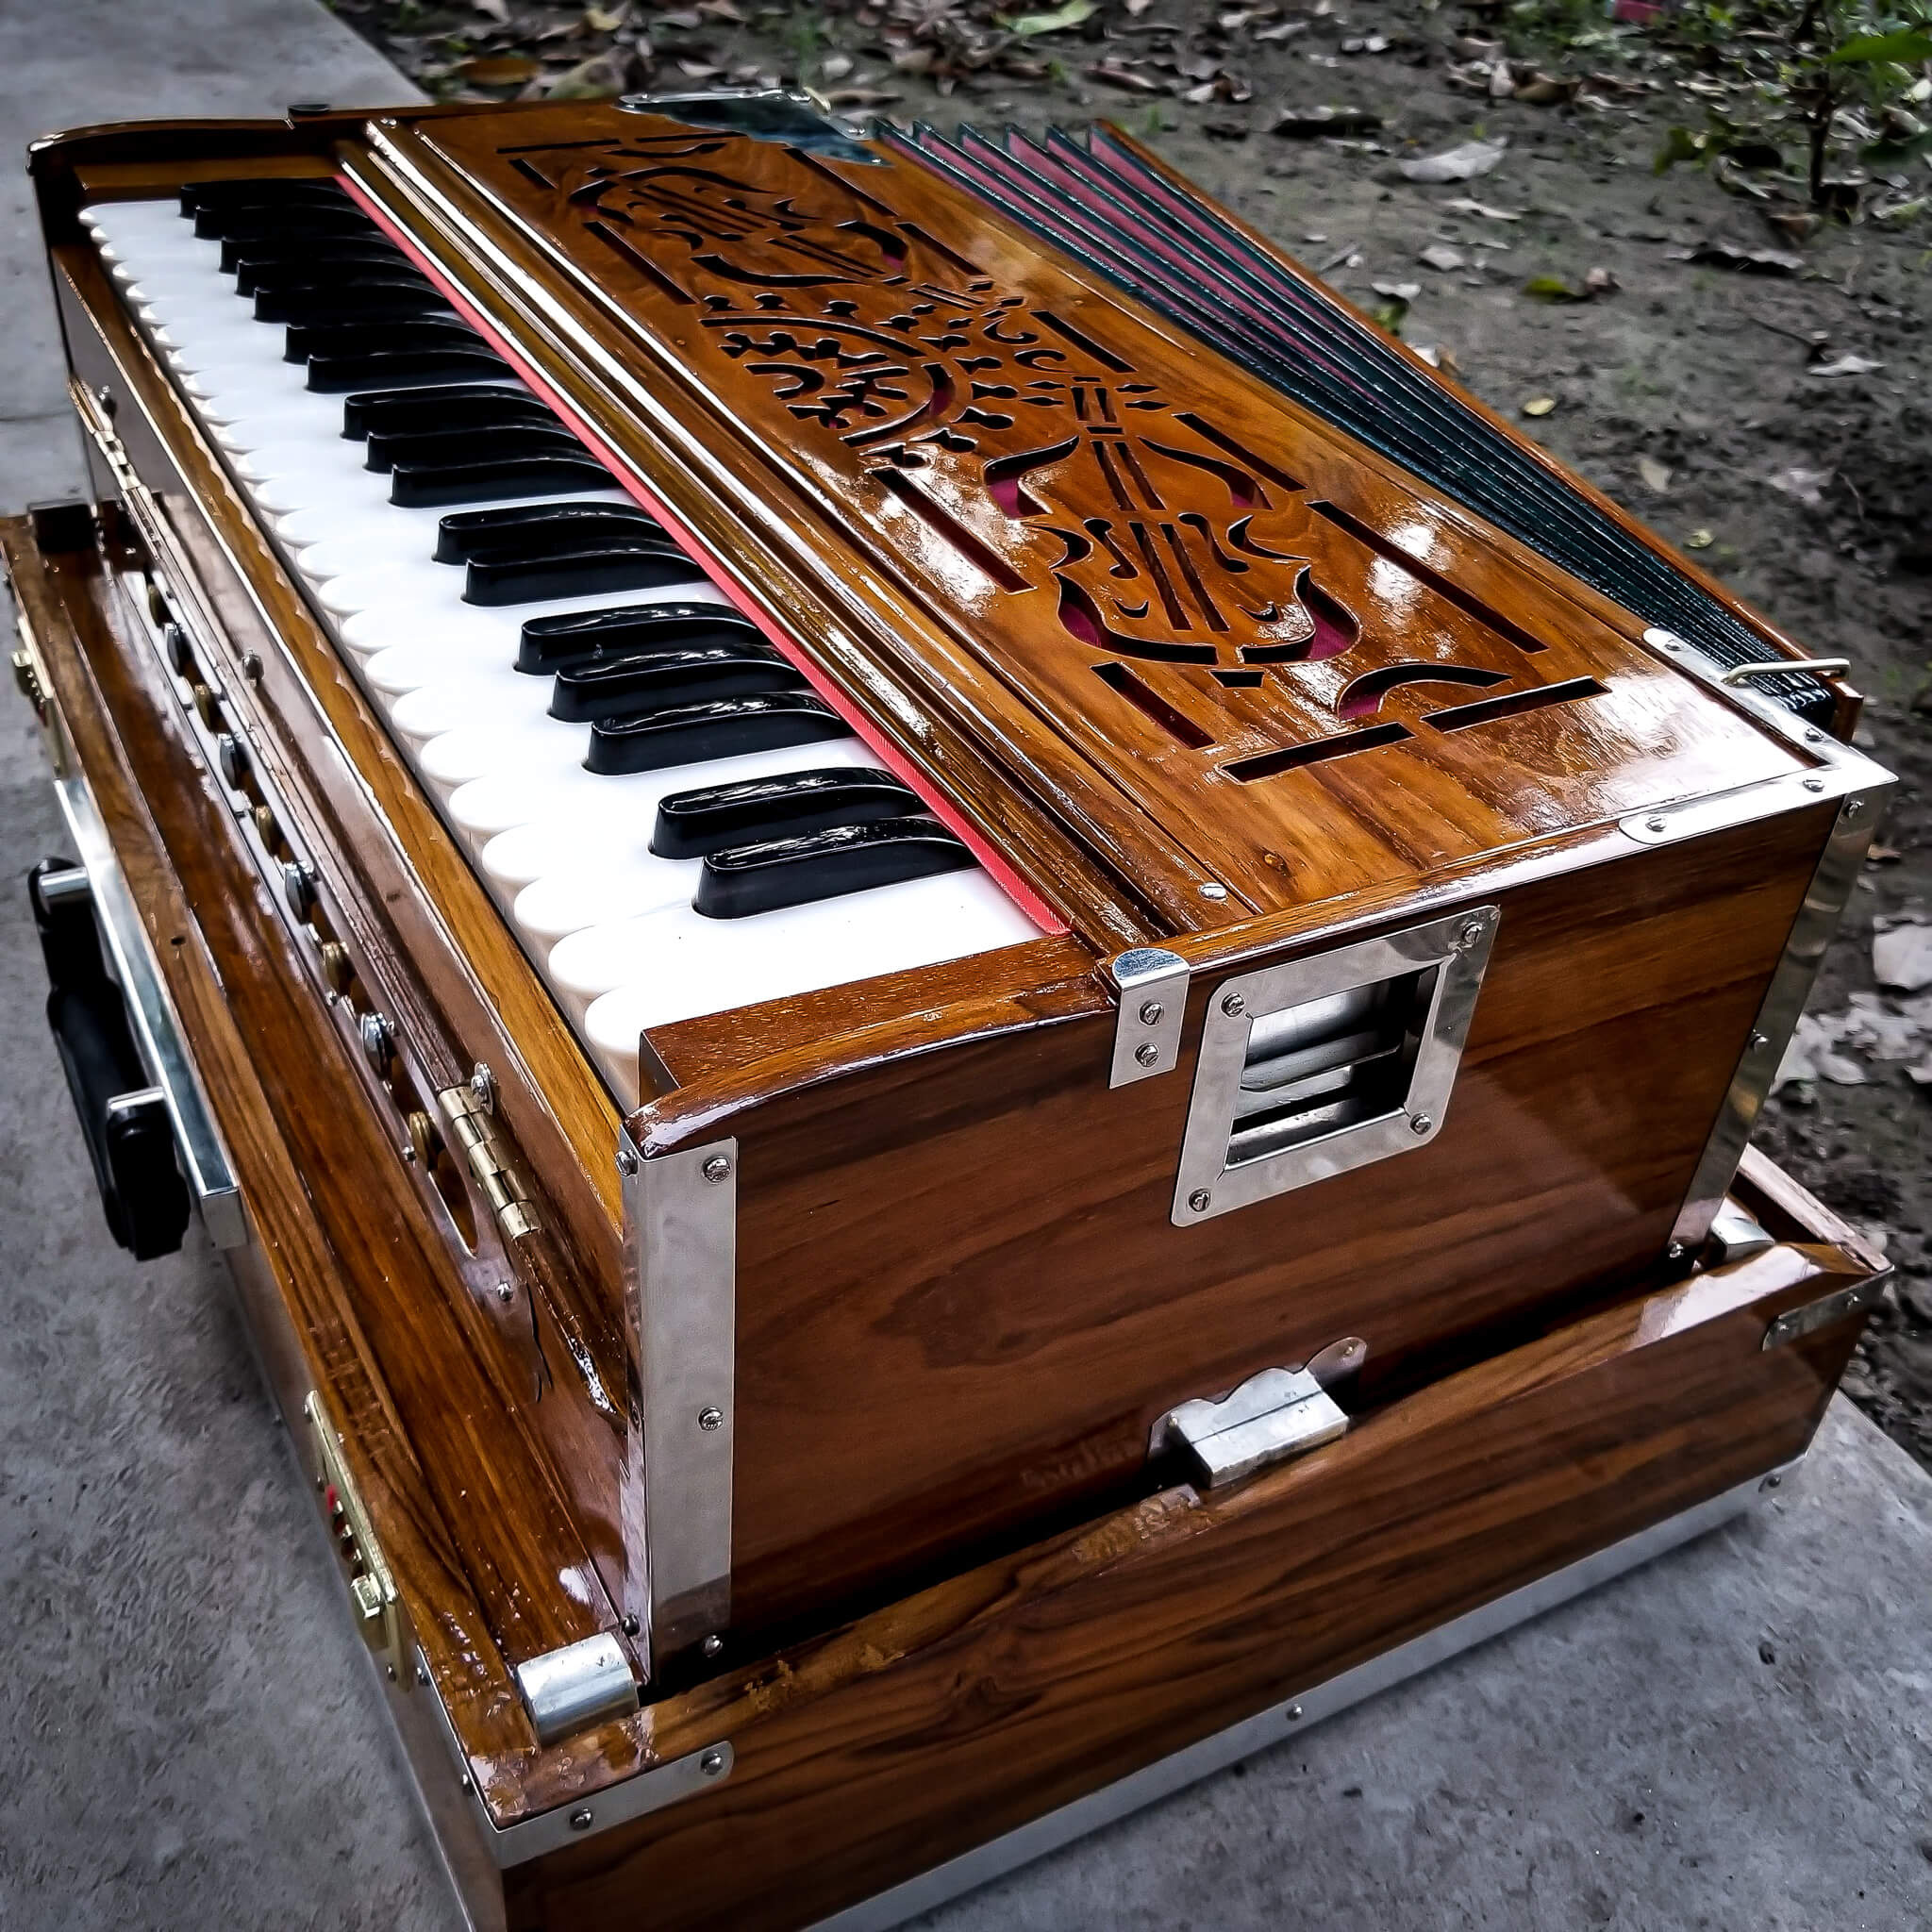 Harmonium: A Wooden Suitcase For Easy Portability And Storage Safety, Black-And-White Keyboard, Musical Instrumen. 2050x2050 HD Background.